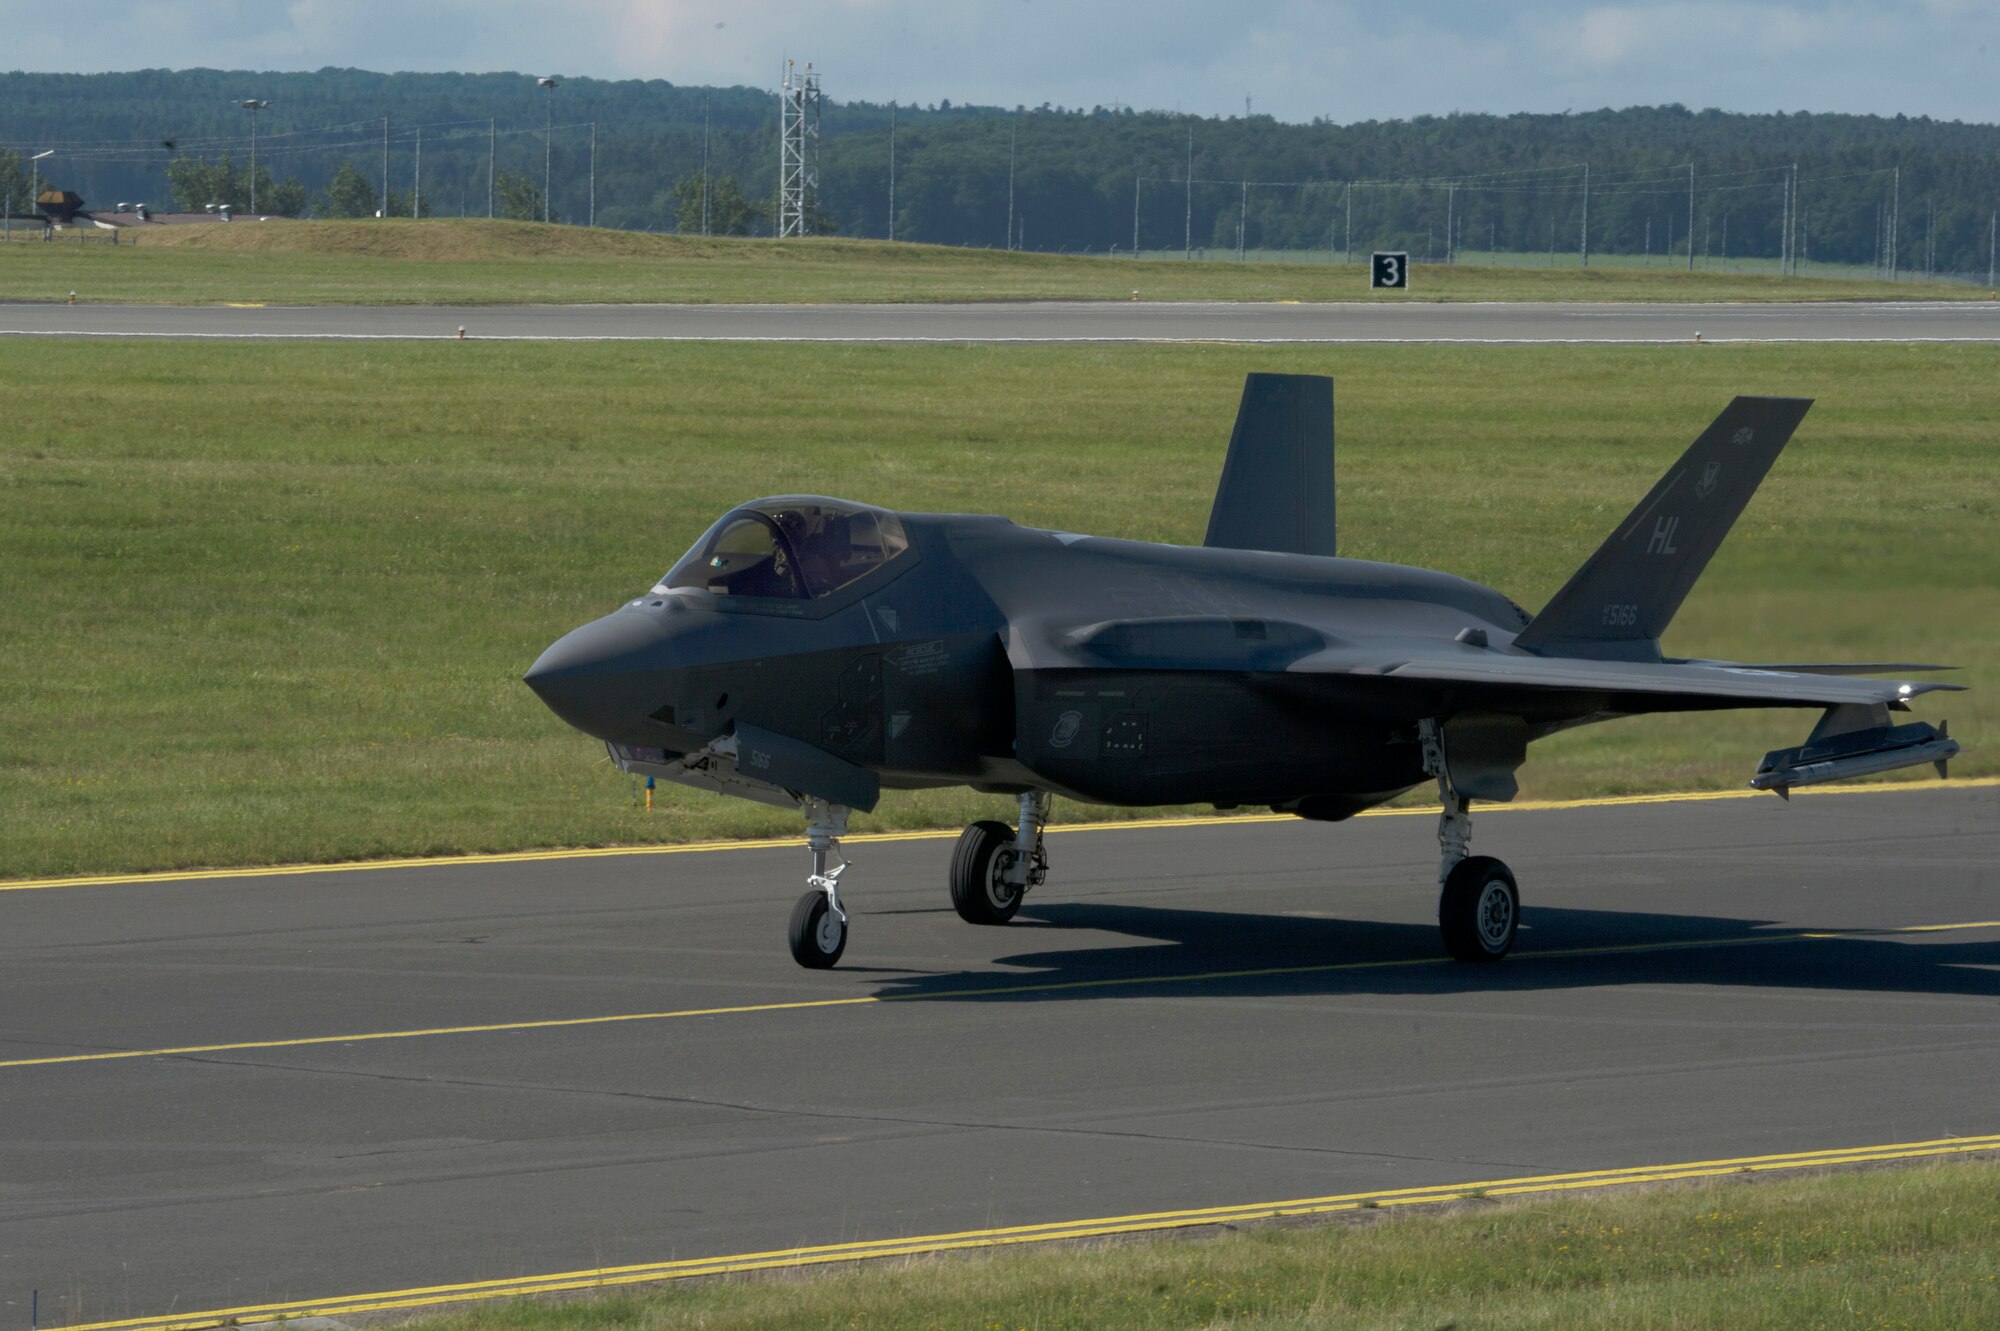 A U.S. Air Force F-35A Lightning II fighter aircraft, assigned to the 421st Fighter Squadron, Hill Air Force Base, Utah, taxis on the flightline at Spangdahlem Air Base, Germany, June 11, 2019. The 421st FS is the newest F-35A squadron, with this being their first deployment with the multi-role stealth fighter. (U.S. Air Force photo by Airman 1st Class Jovante Johnson)